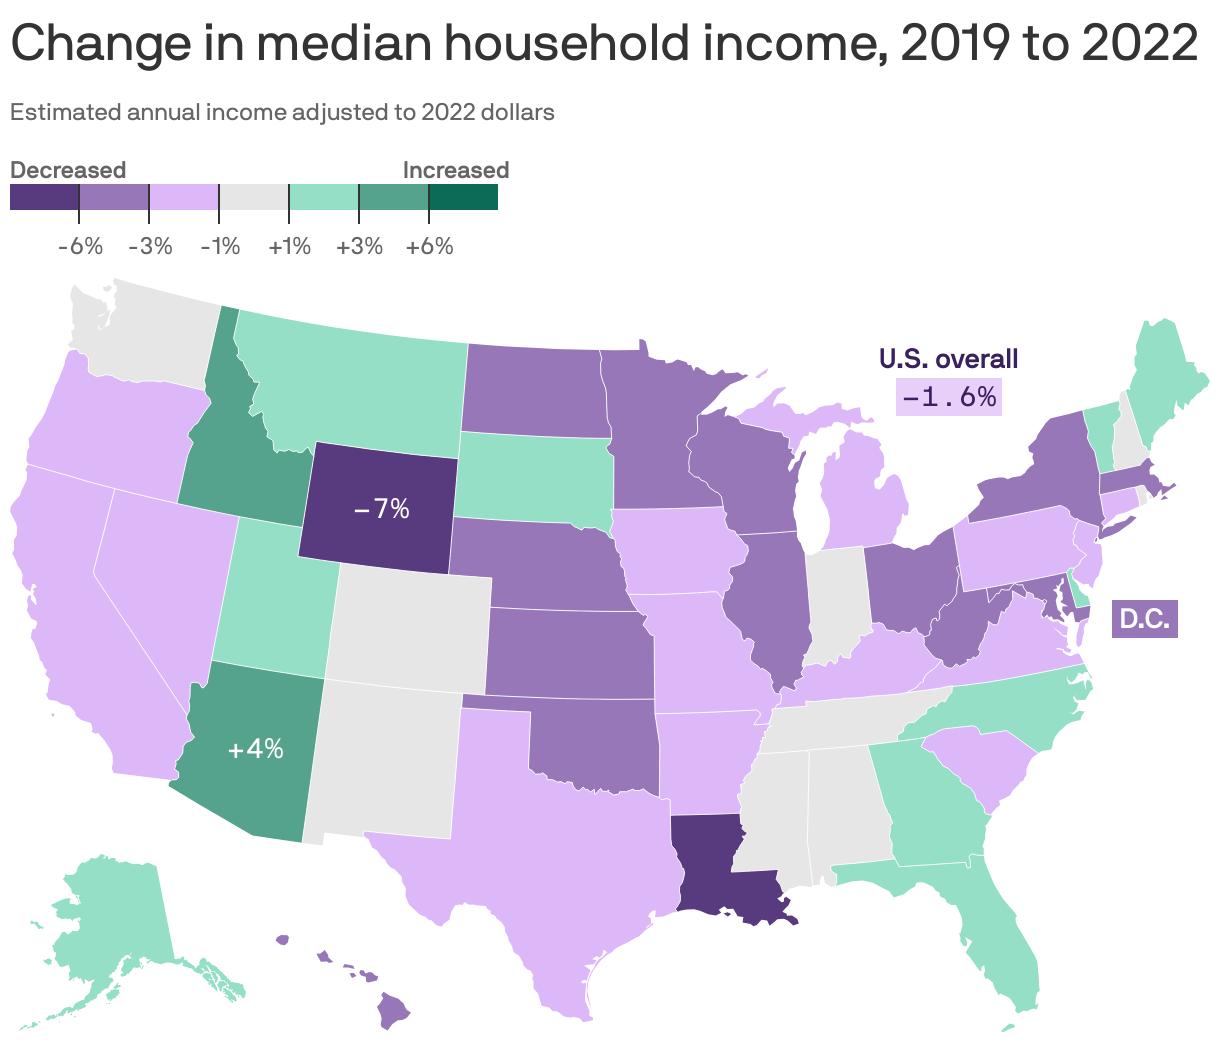 Change in median household income, 2019 to 2022